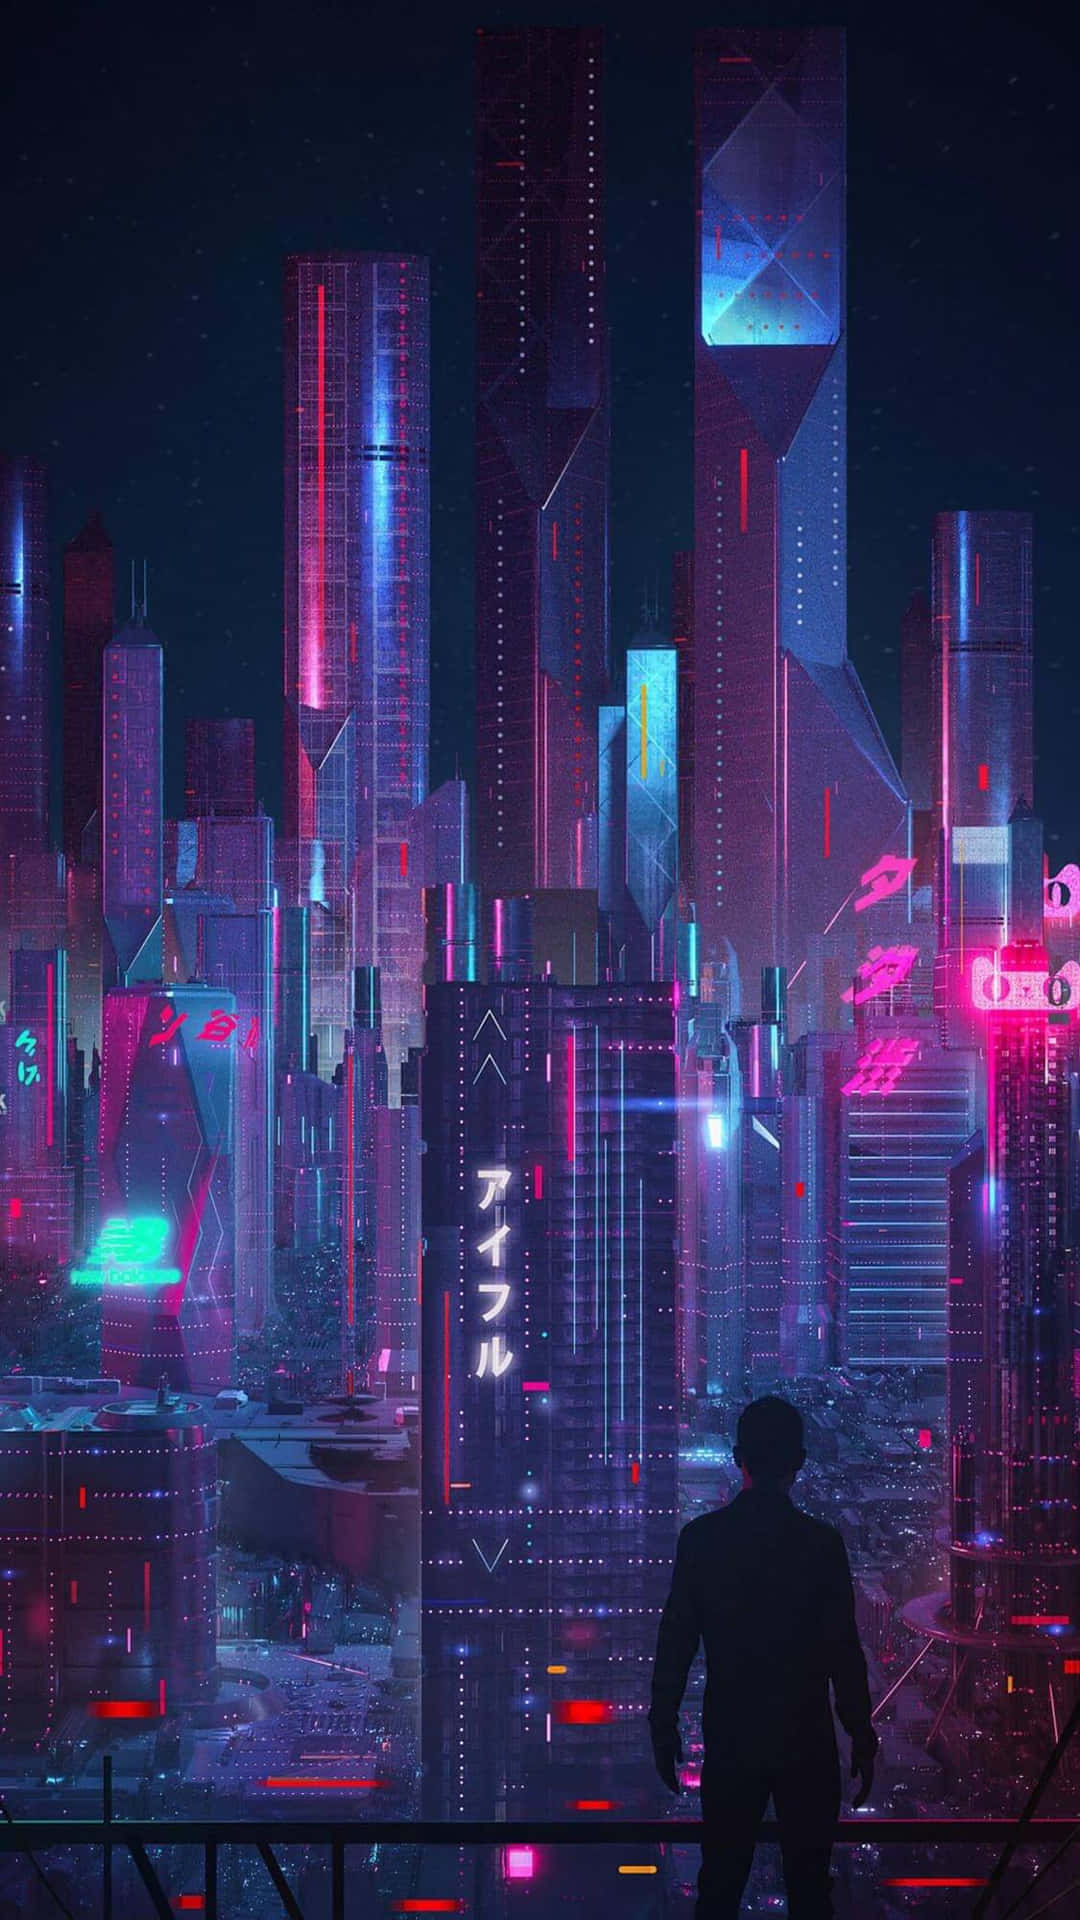 The future of urban living - Welcome to Cyberpunk City